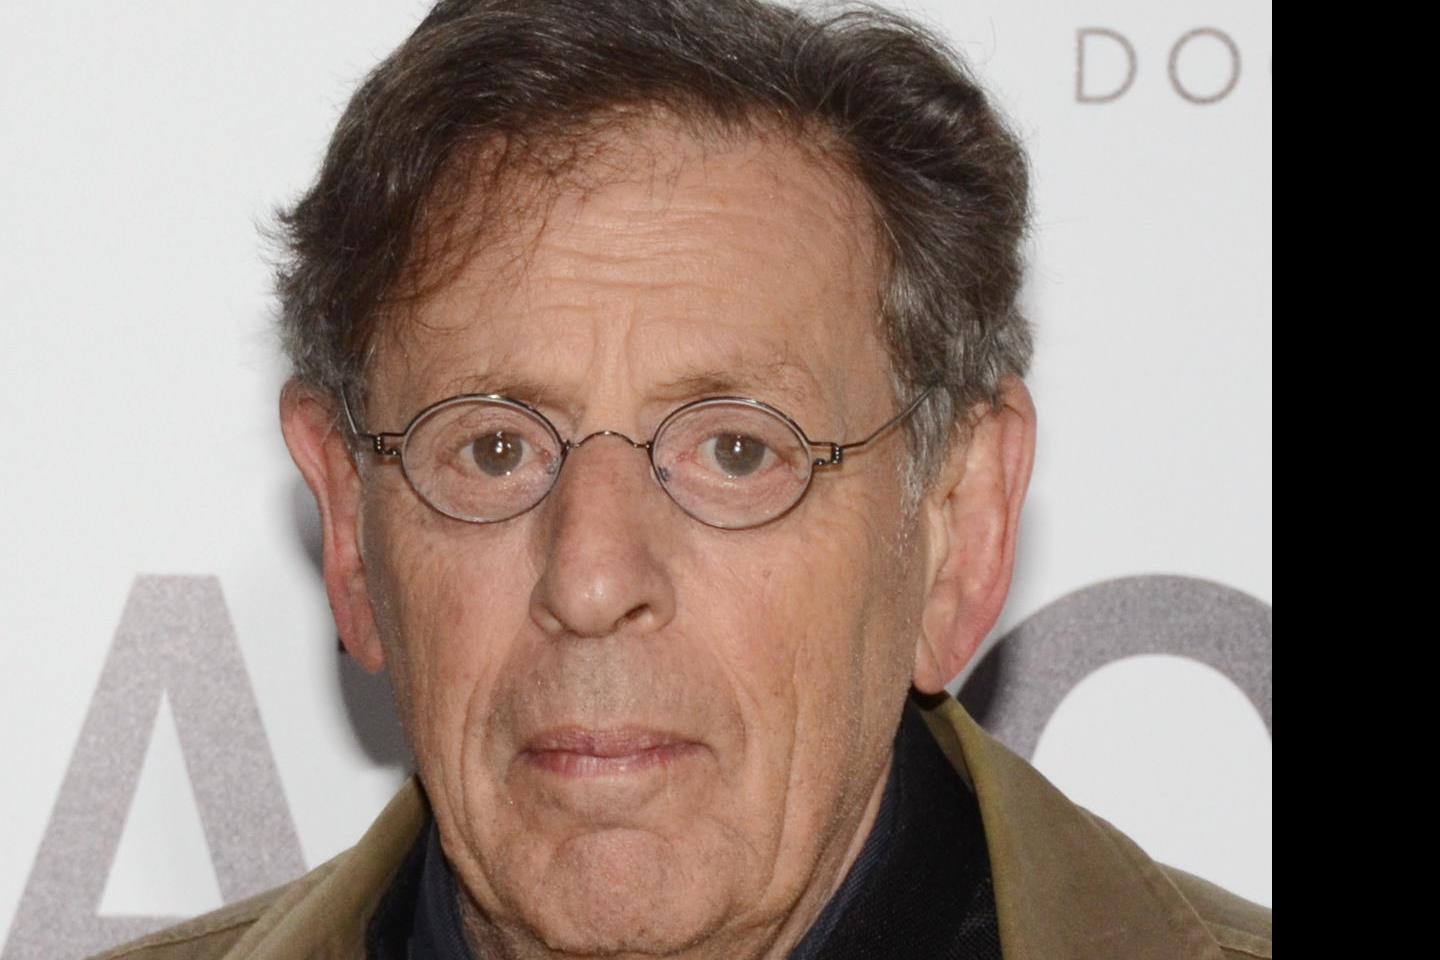 Philip Glass Tickets Buy and sell Philip Glass Tickets